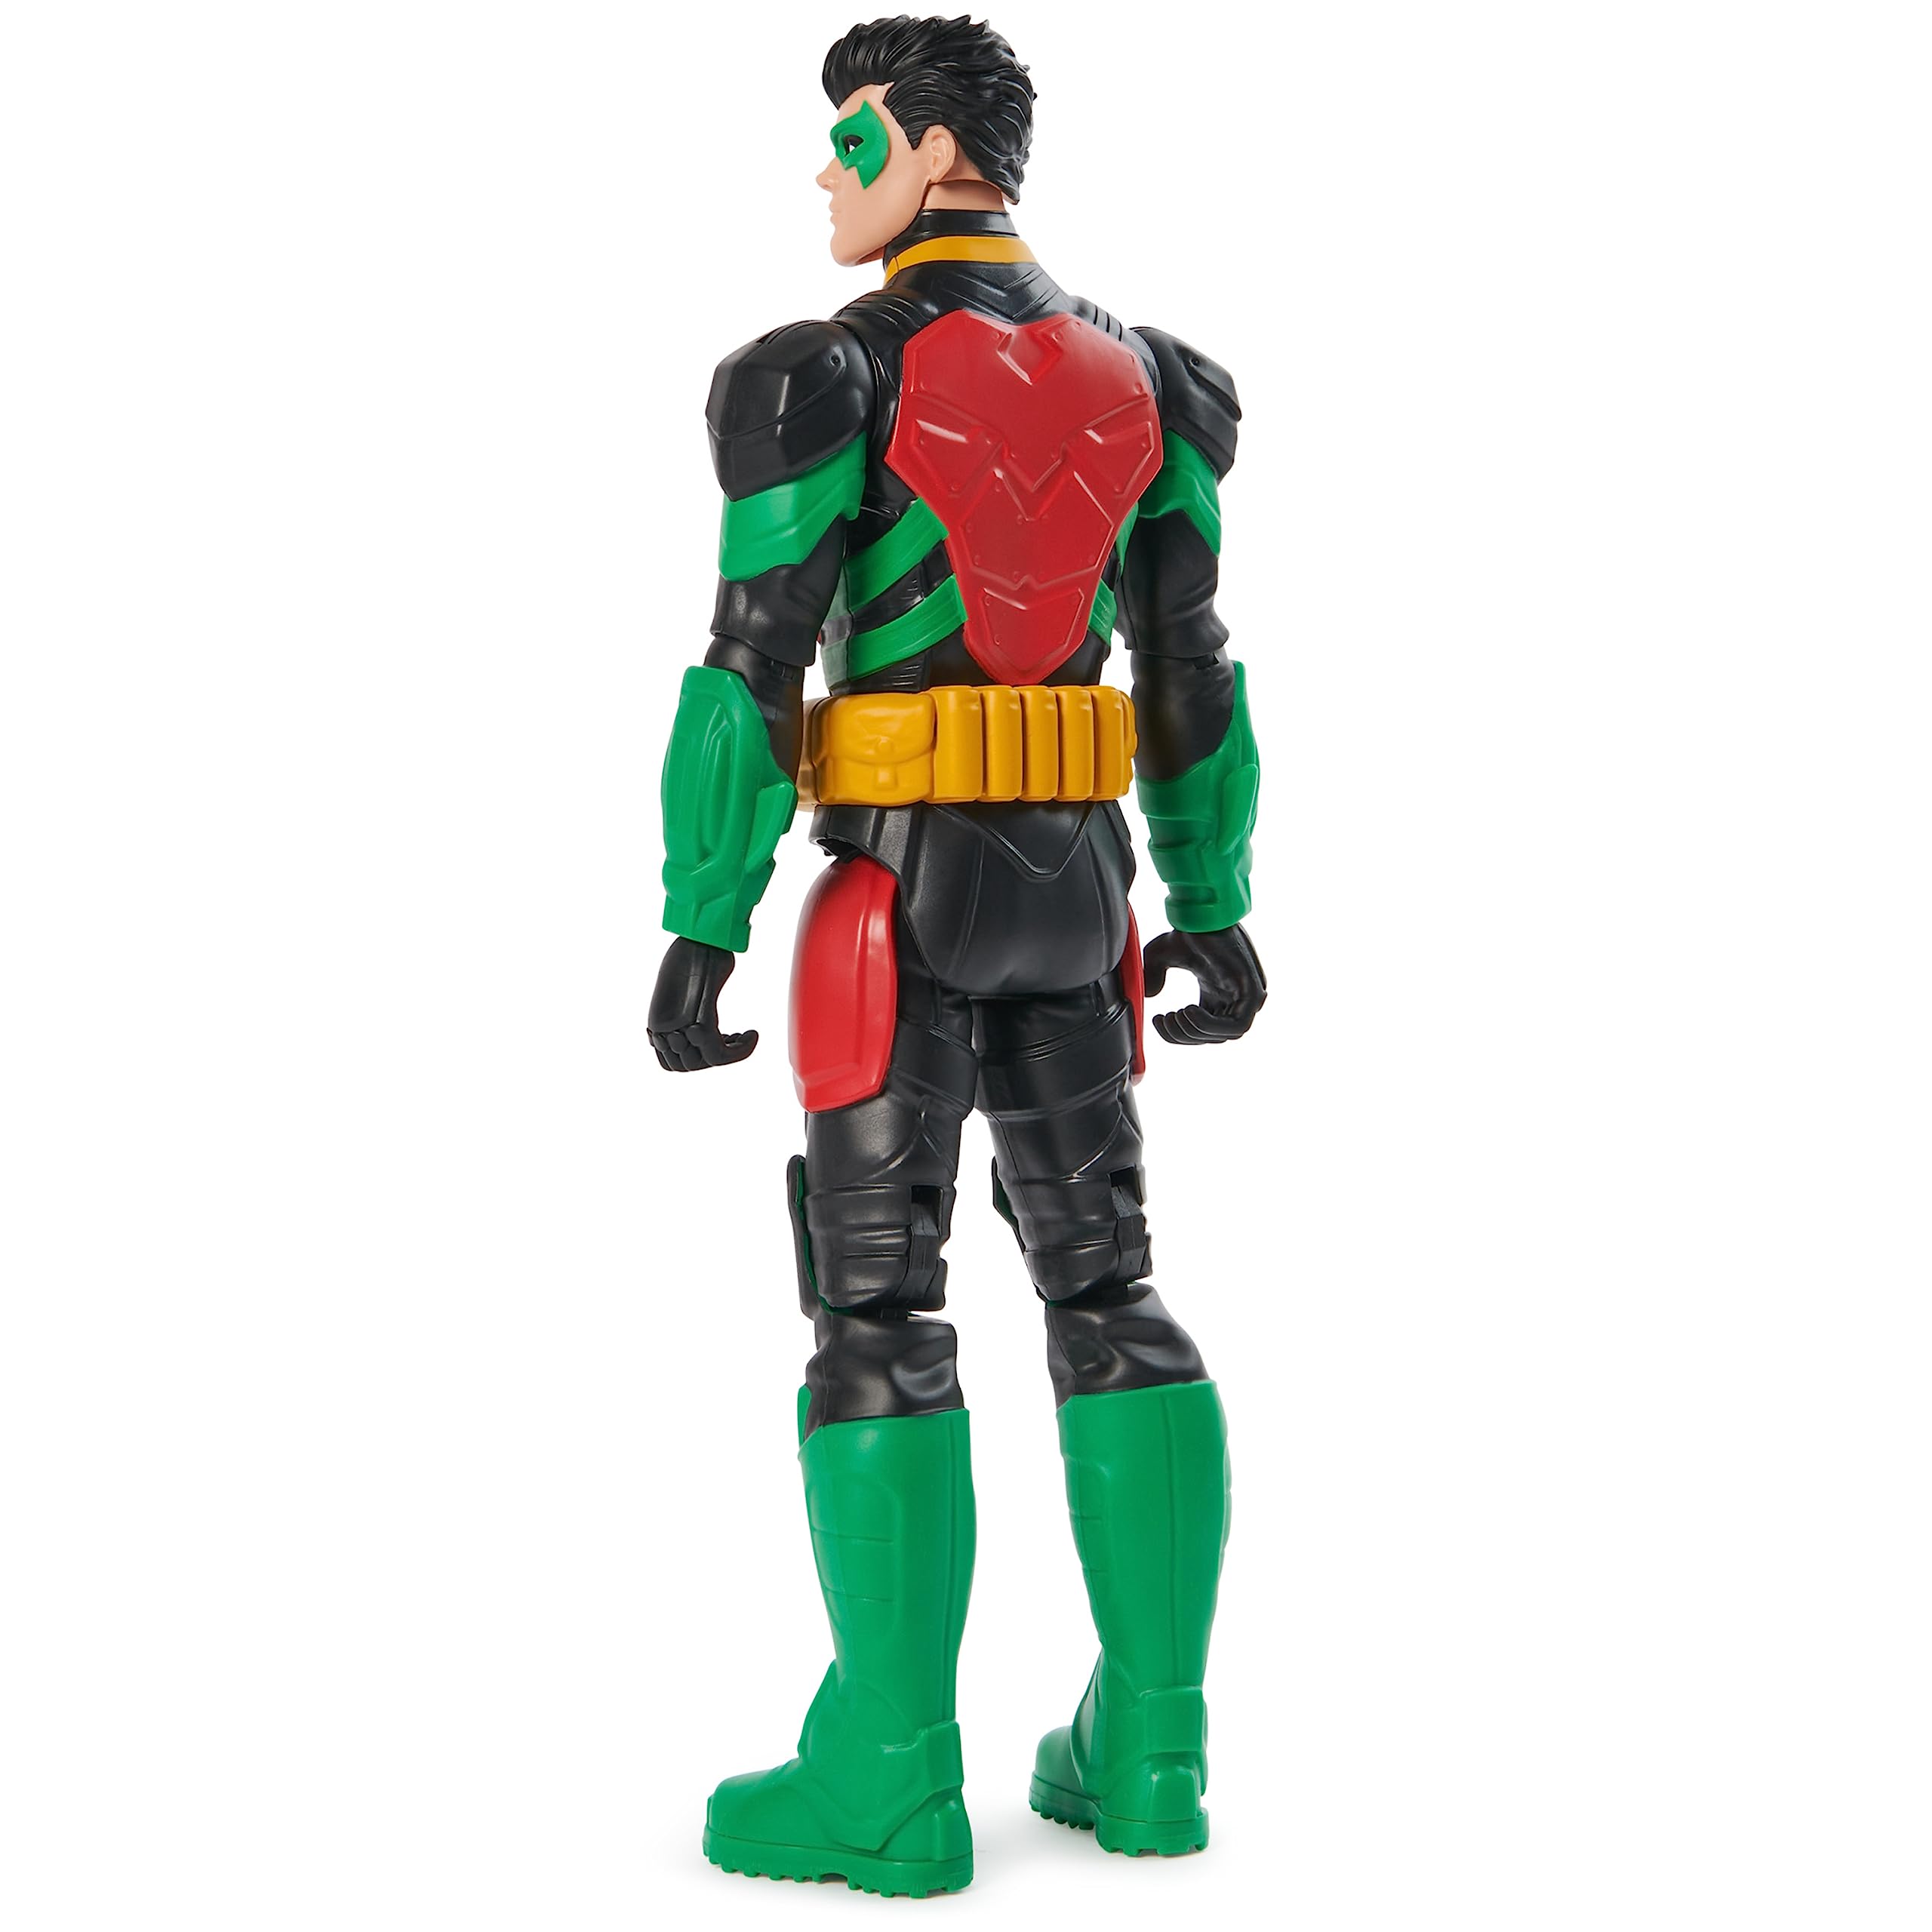 DC Comics, Robin Action Figure, 12-inch, Kids Toys for Boys and Girls, Ages 3+